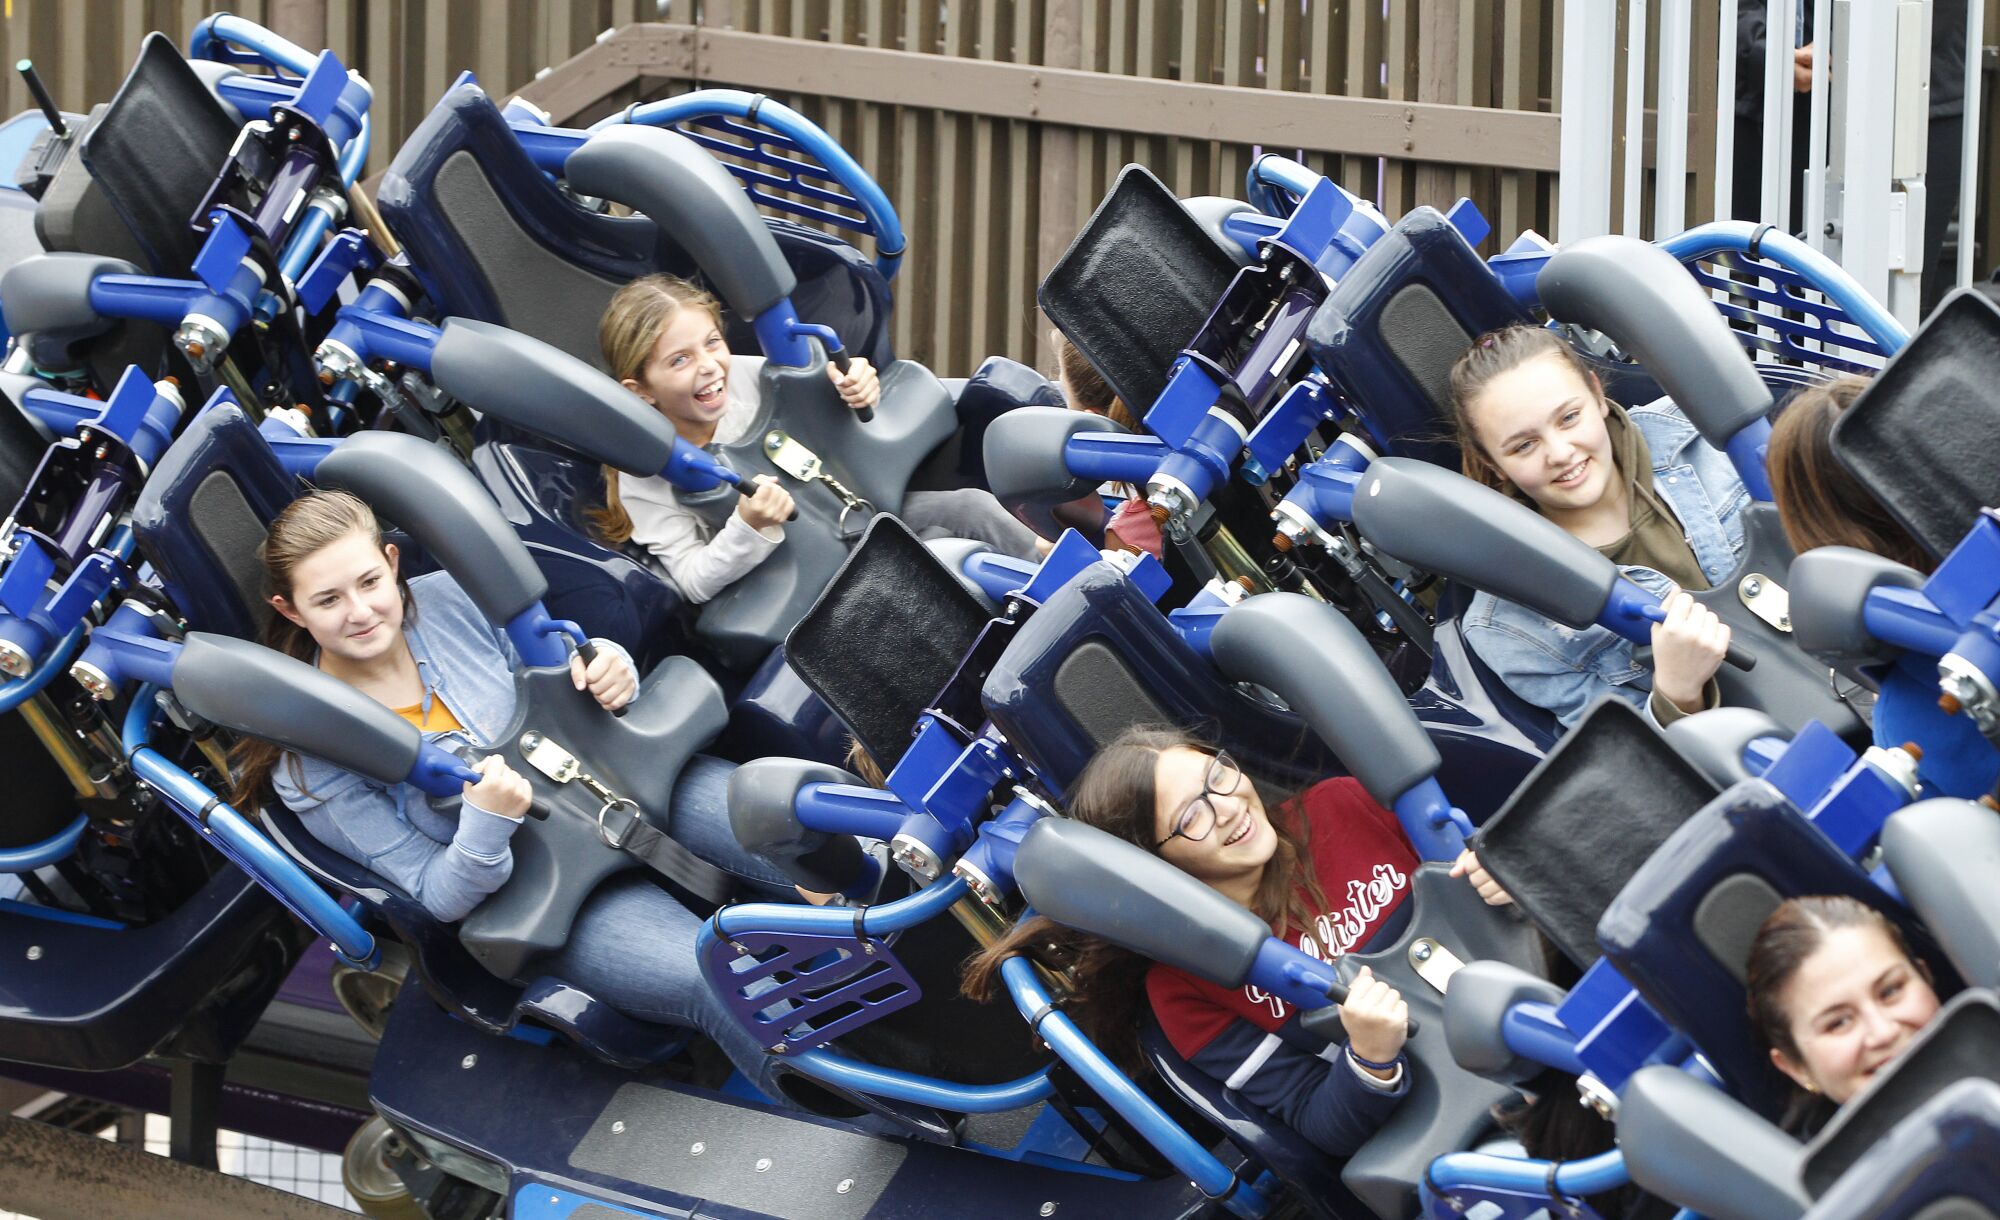 Riders brave the new Sea World ride called Tidal Twister on May 21, 2019.